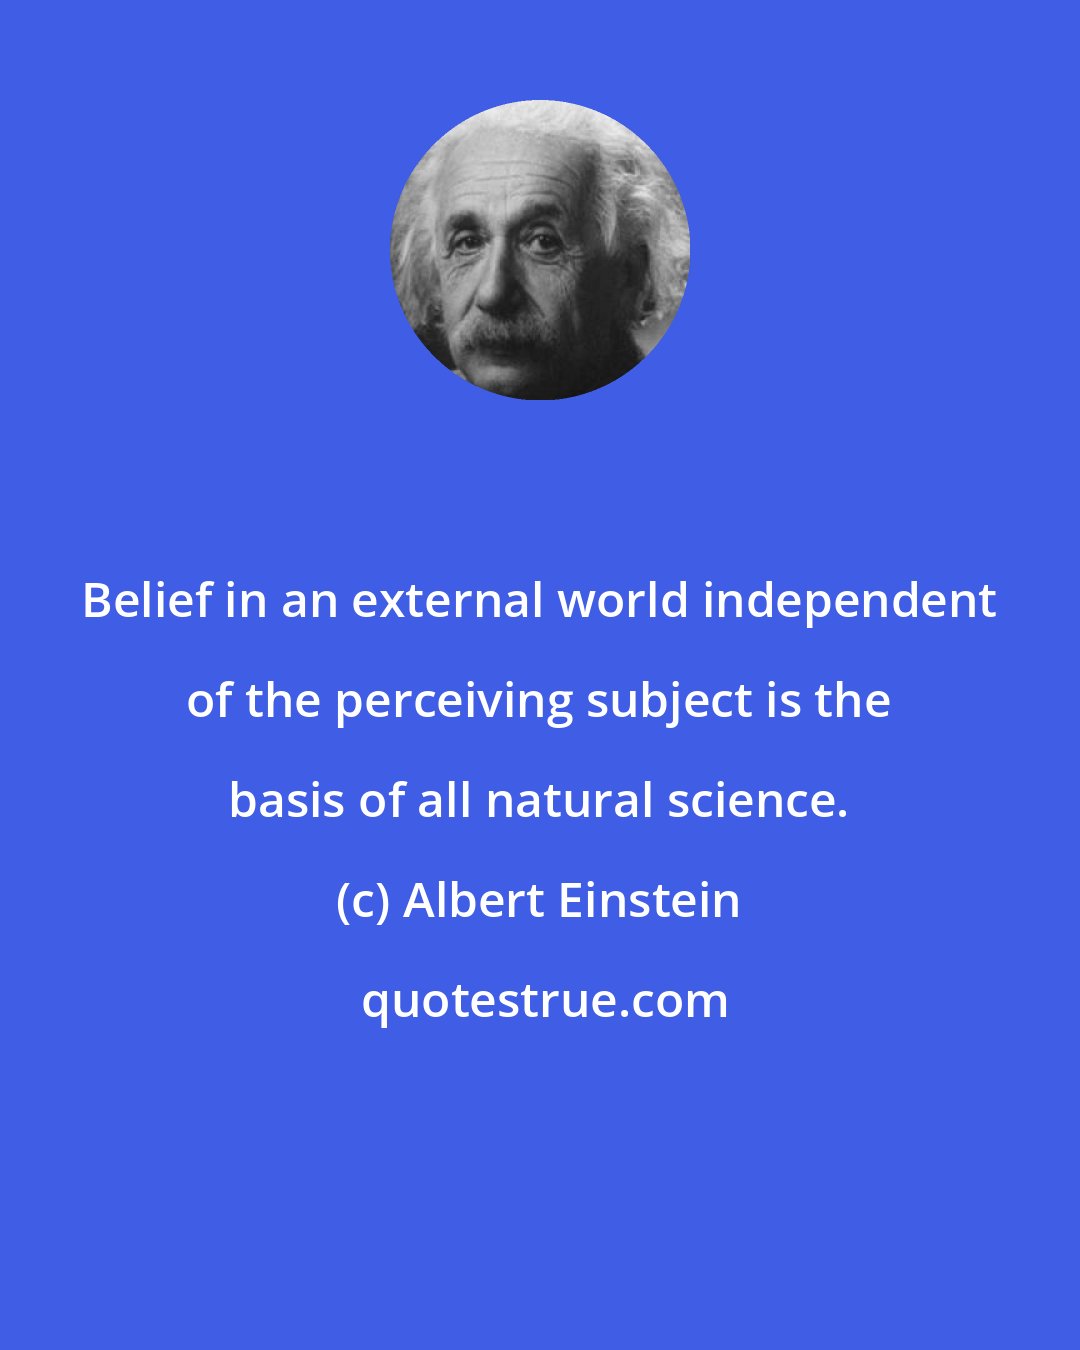 Albert Einstein: Belief in an external world independent of the perceiving subject is the basis of all natural science.